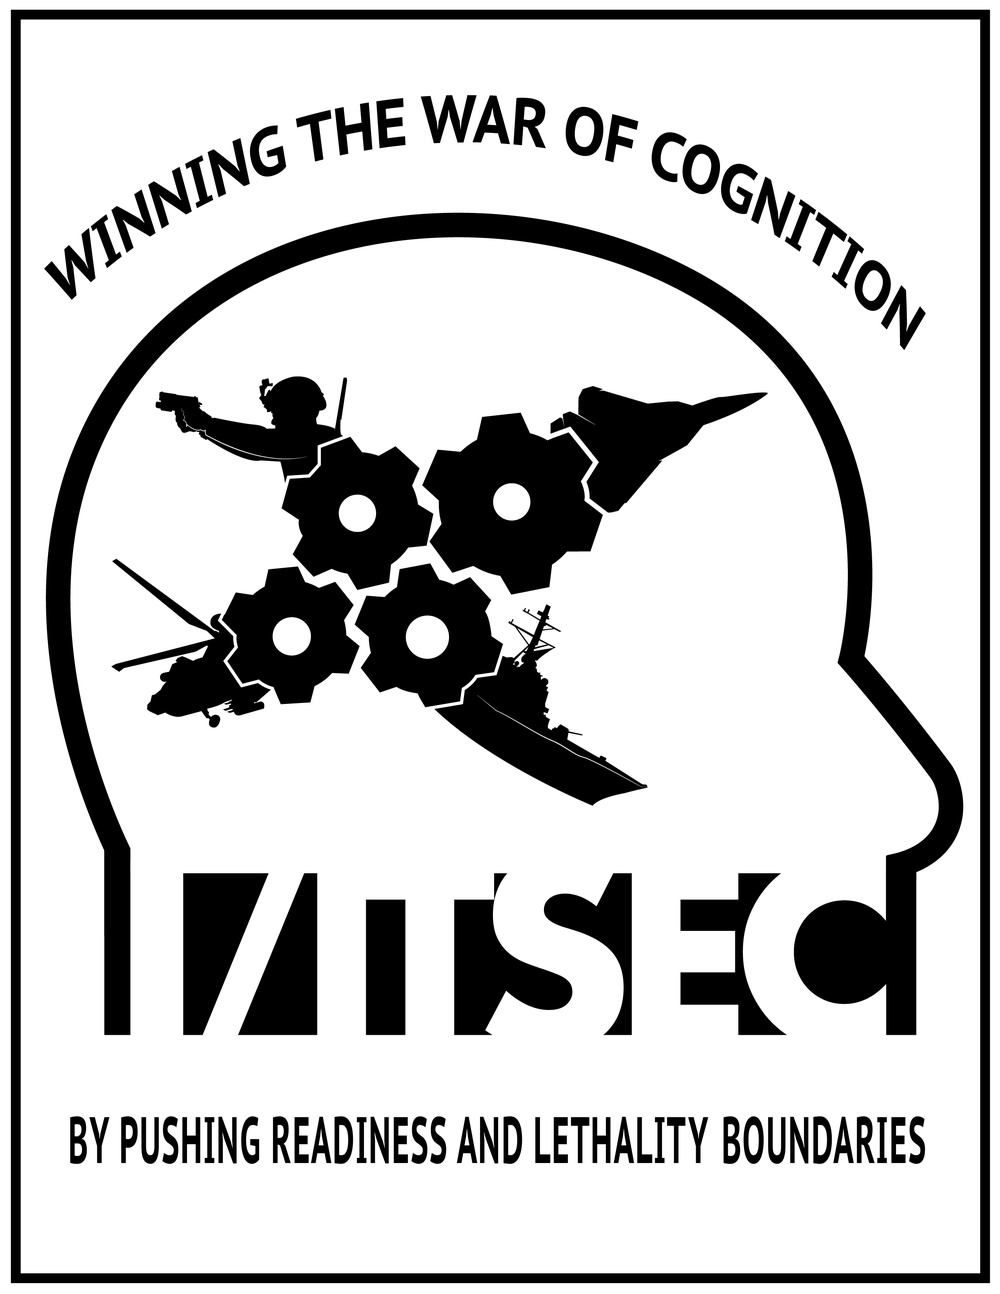 Official 2019 I/ITSEC graphic